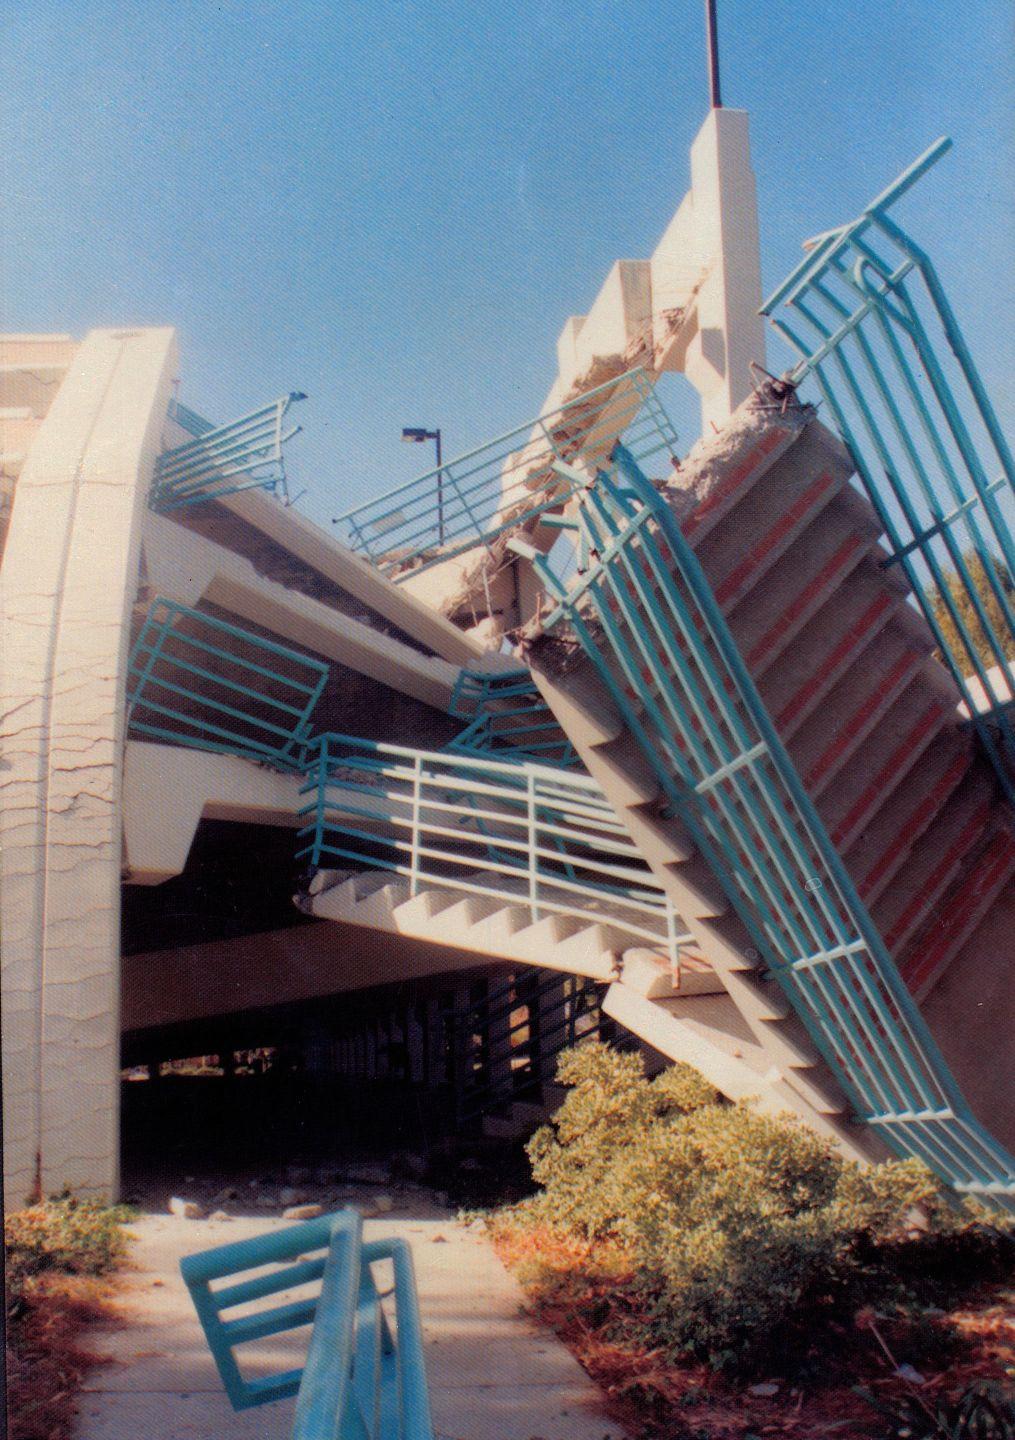 FILE PHOTO - The 1994 Earthquake has destroyed Parking Structure C on Jan. 17, 1994 in Northridge, Calif.